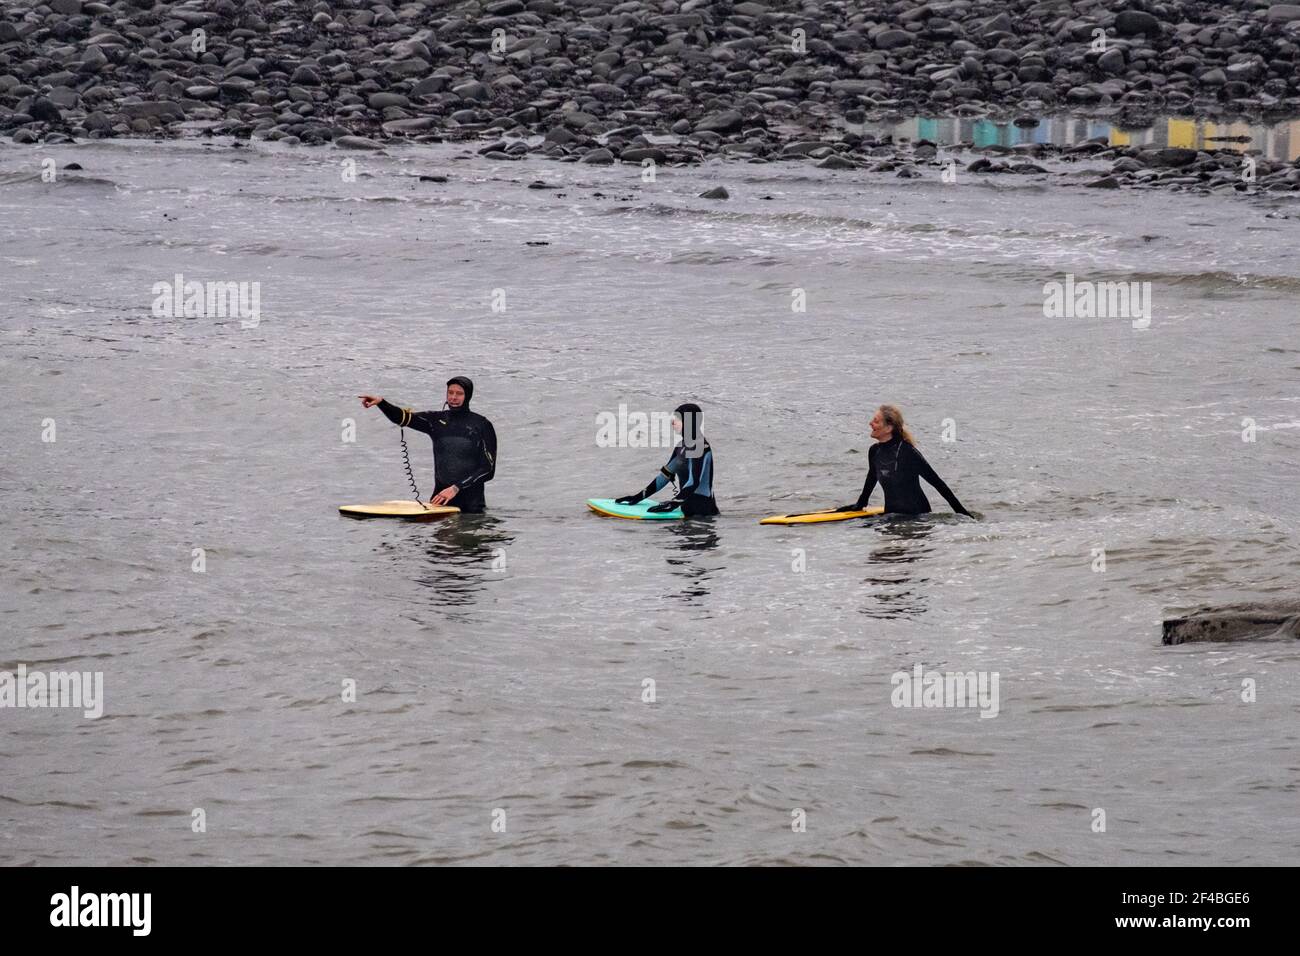 Surfers enjoy the waves in Aberystwyth, Wales. Stock Photo